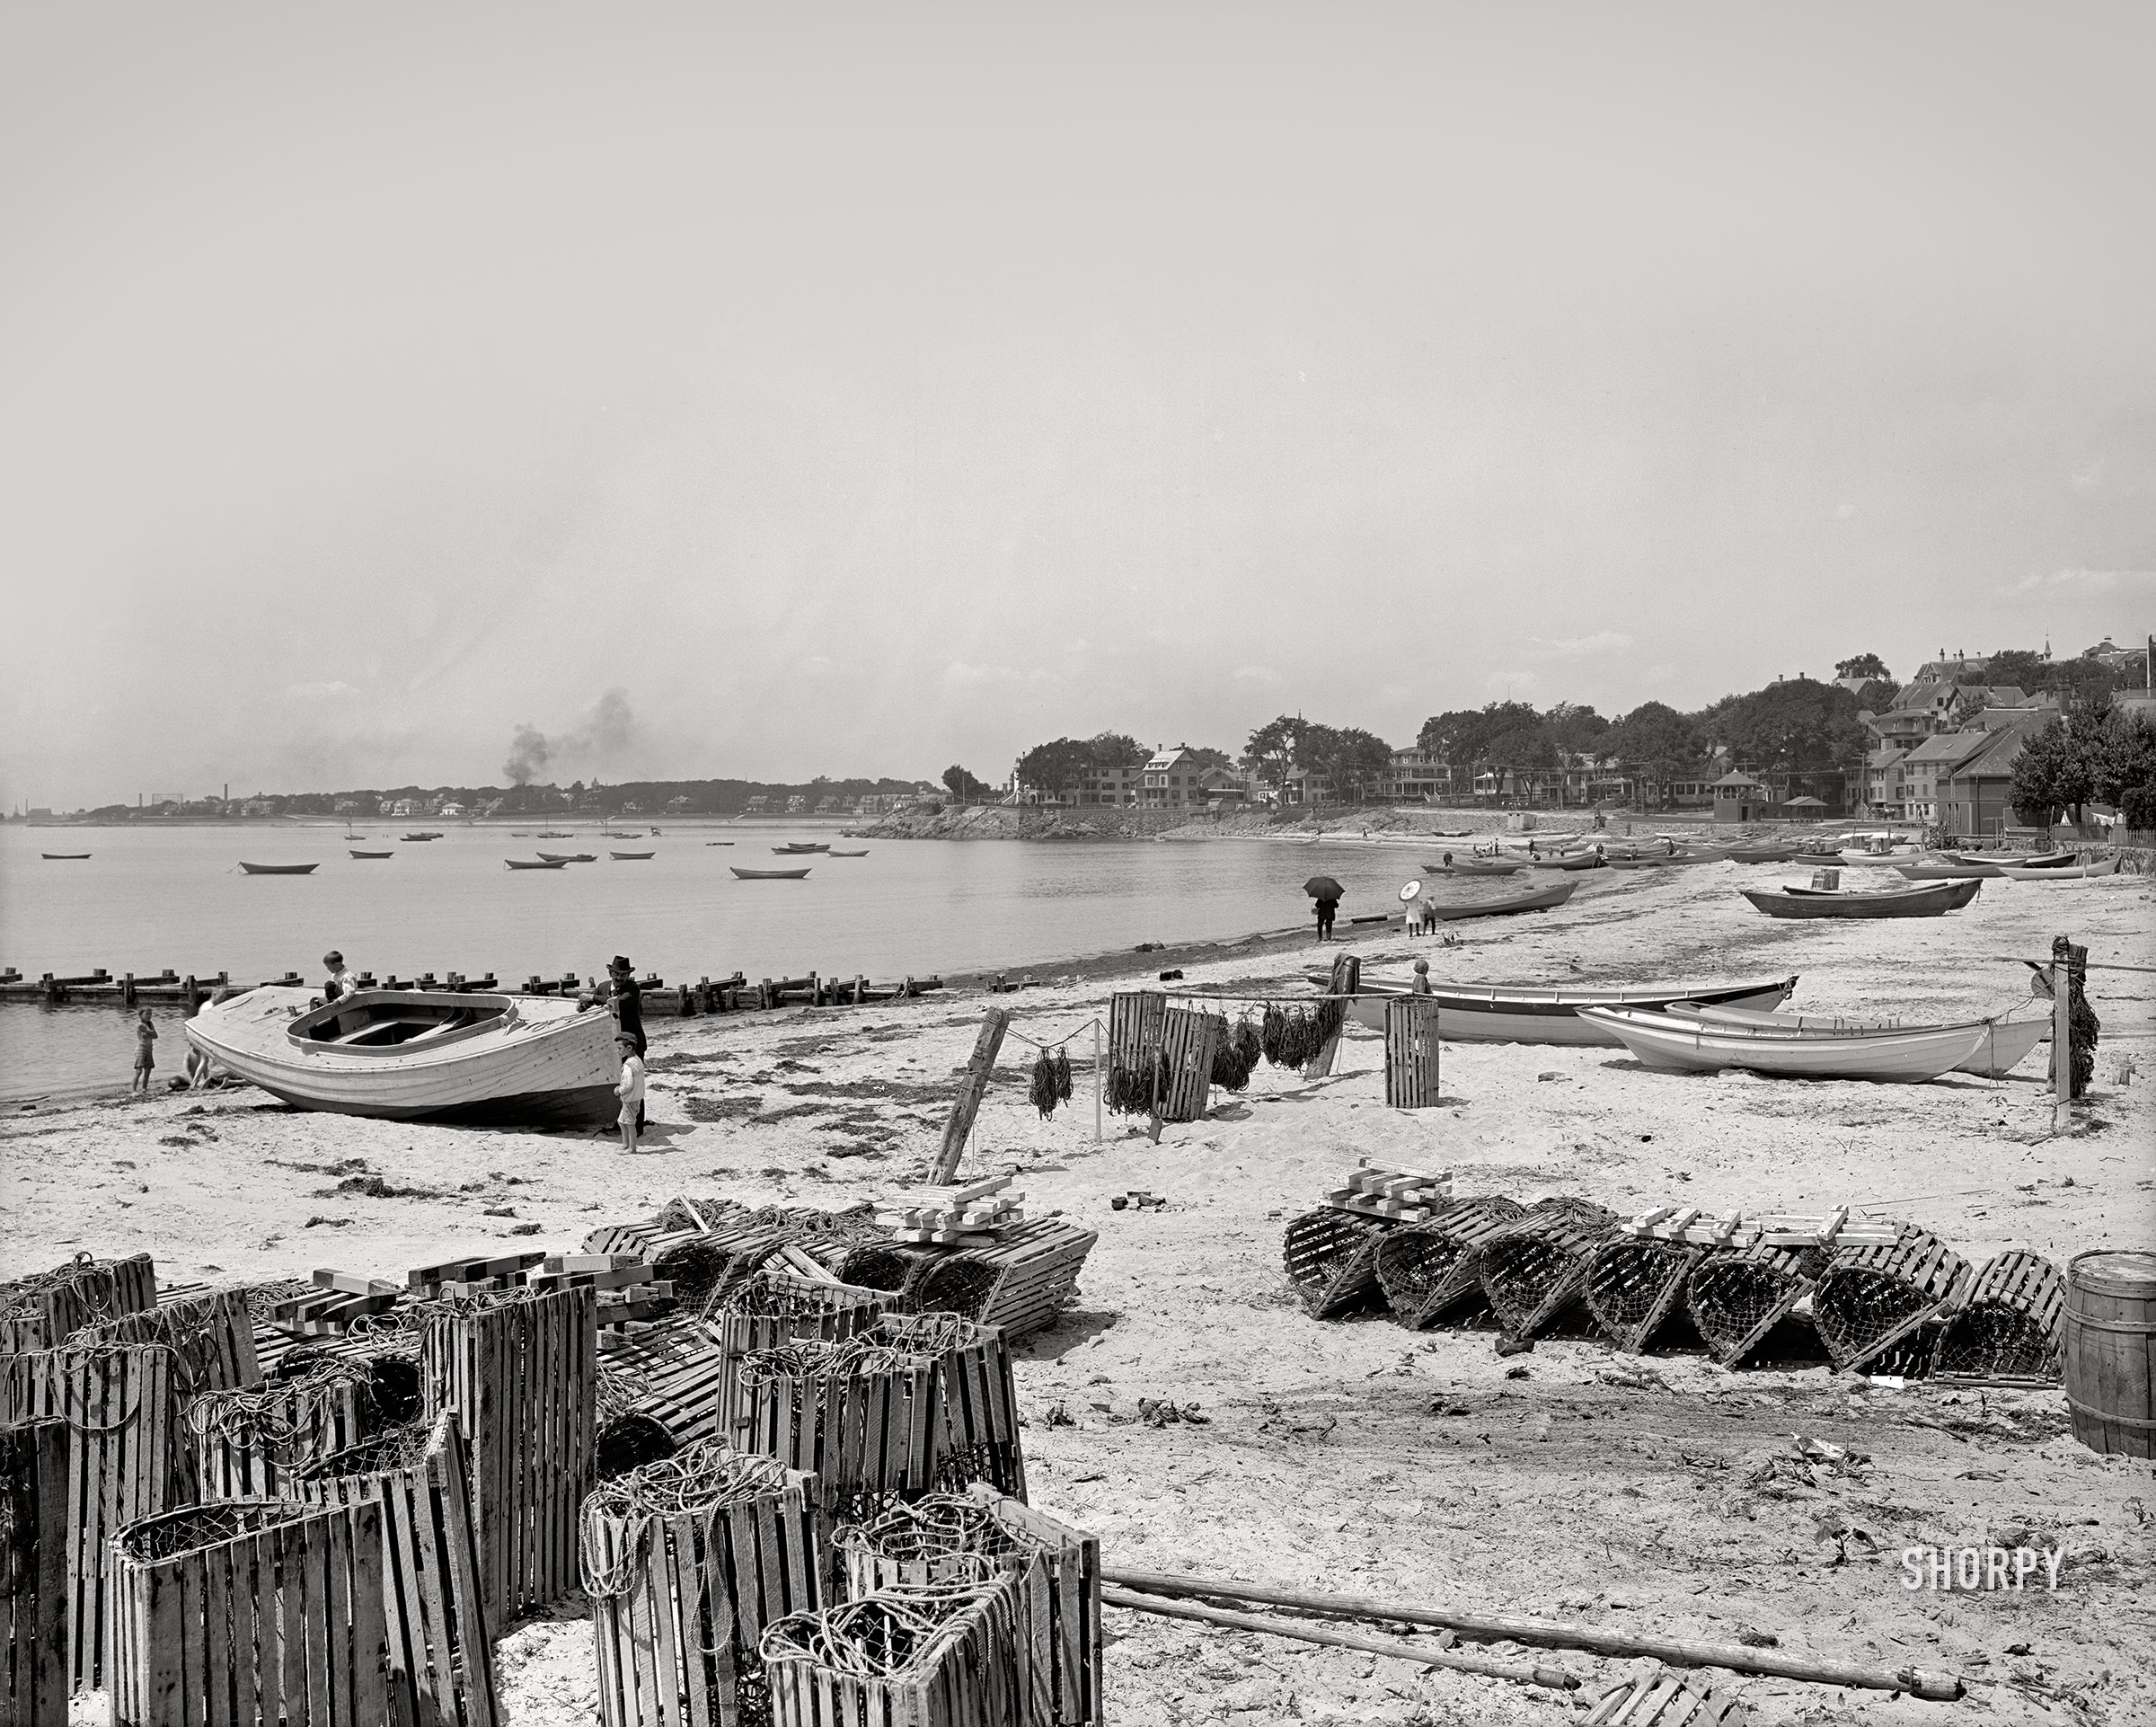 1907. "The beach and lobster traps -- Swampscott, Massachusetts." 8x10 inch dry plate glass negative, Detroit Publishing Company. View full size.